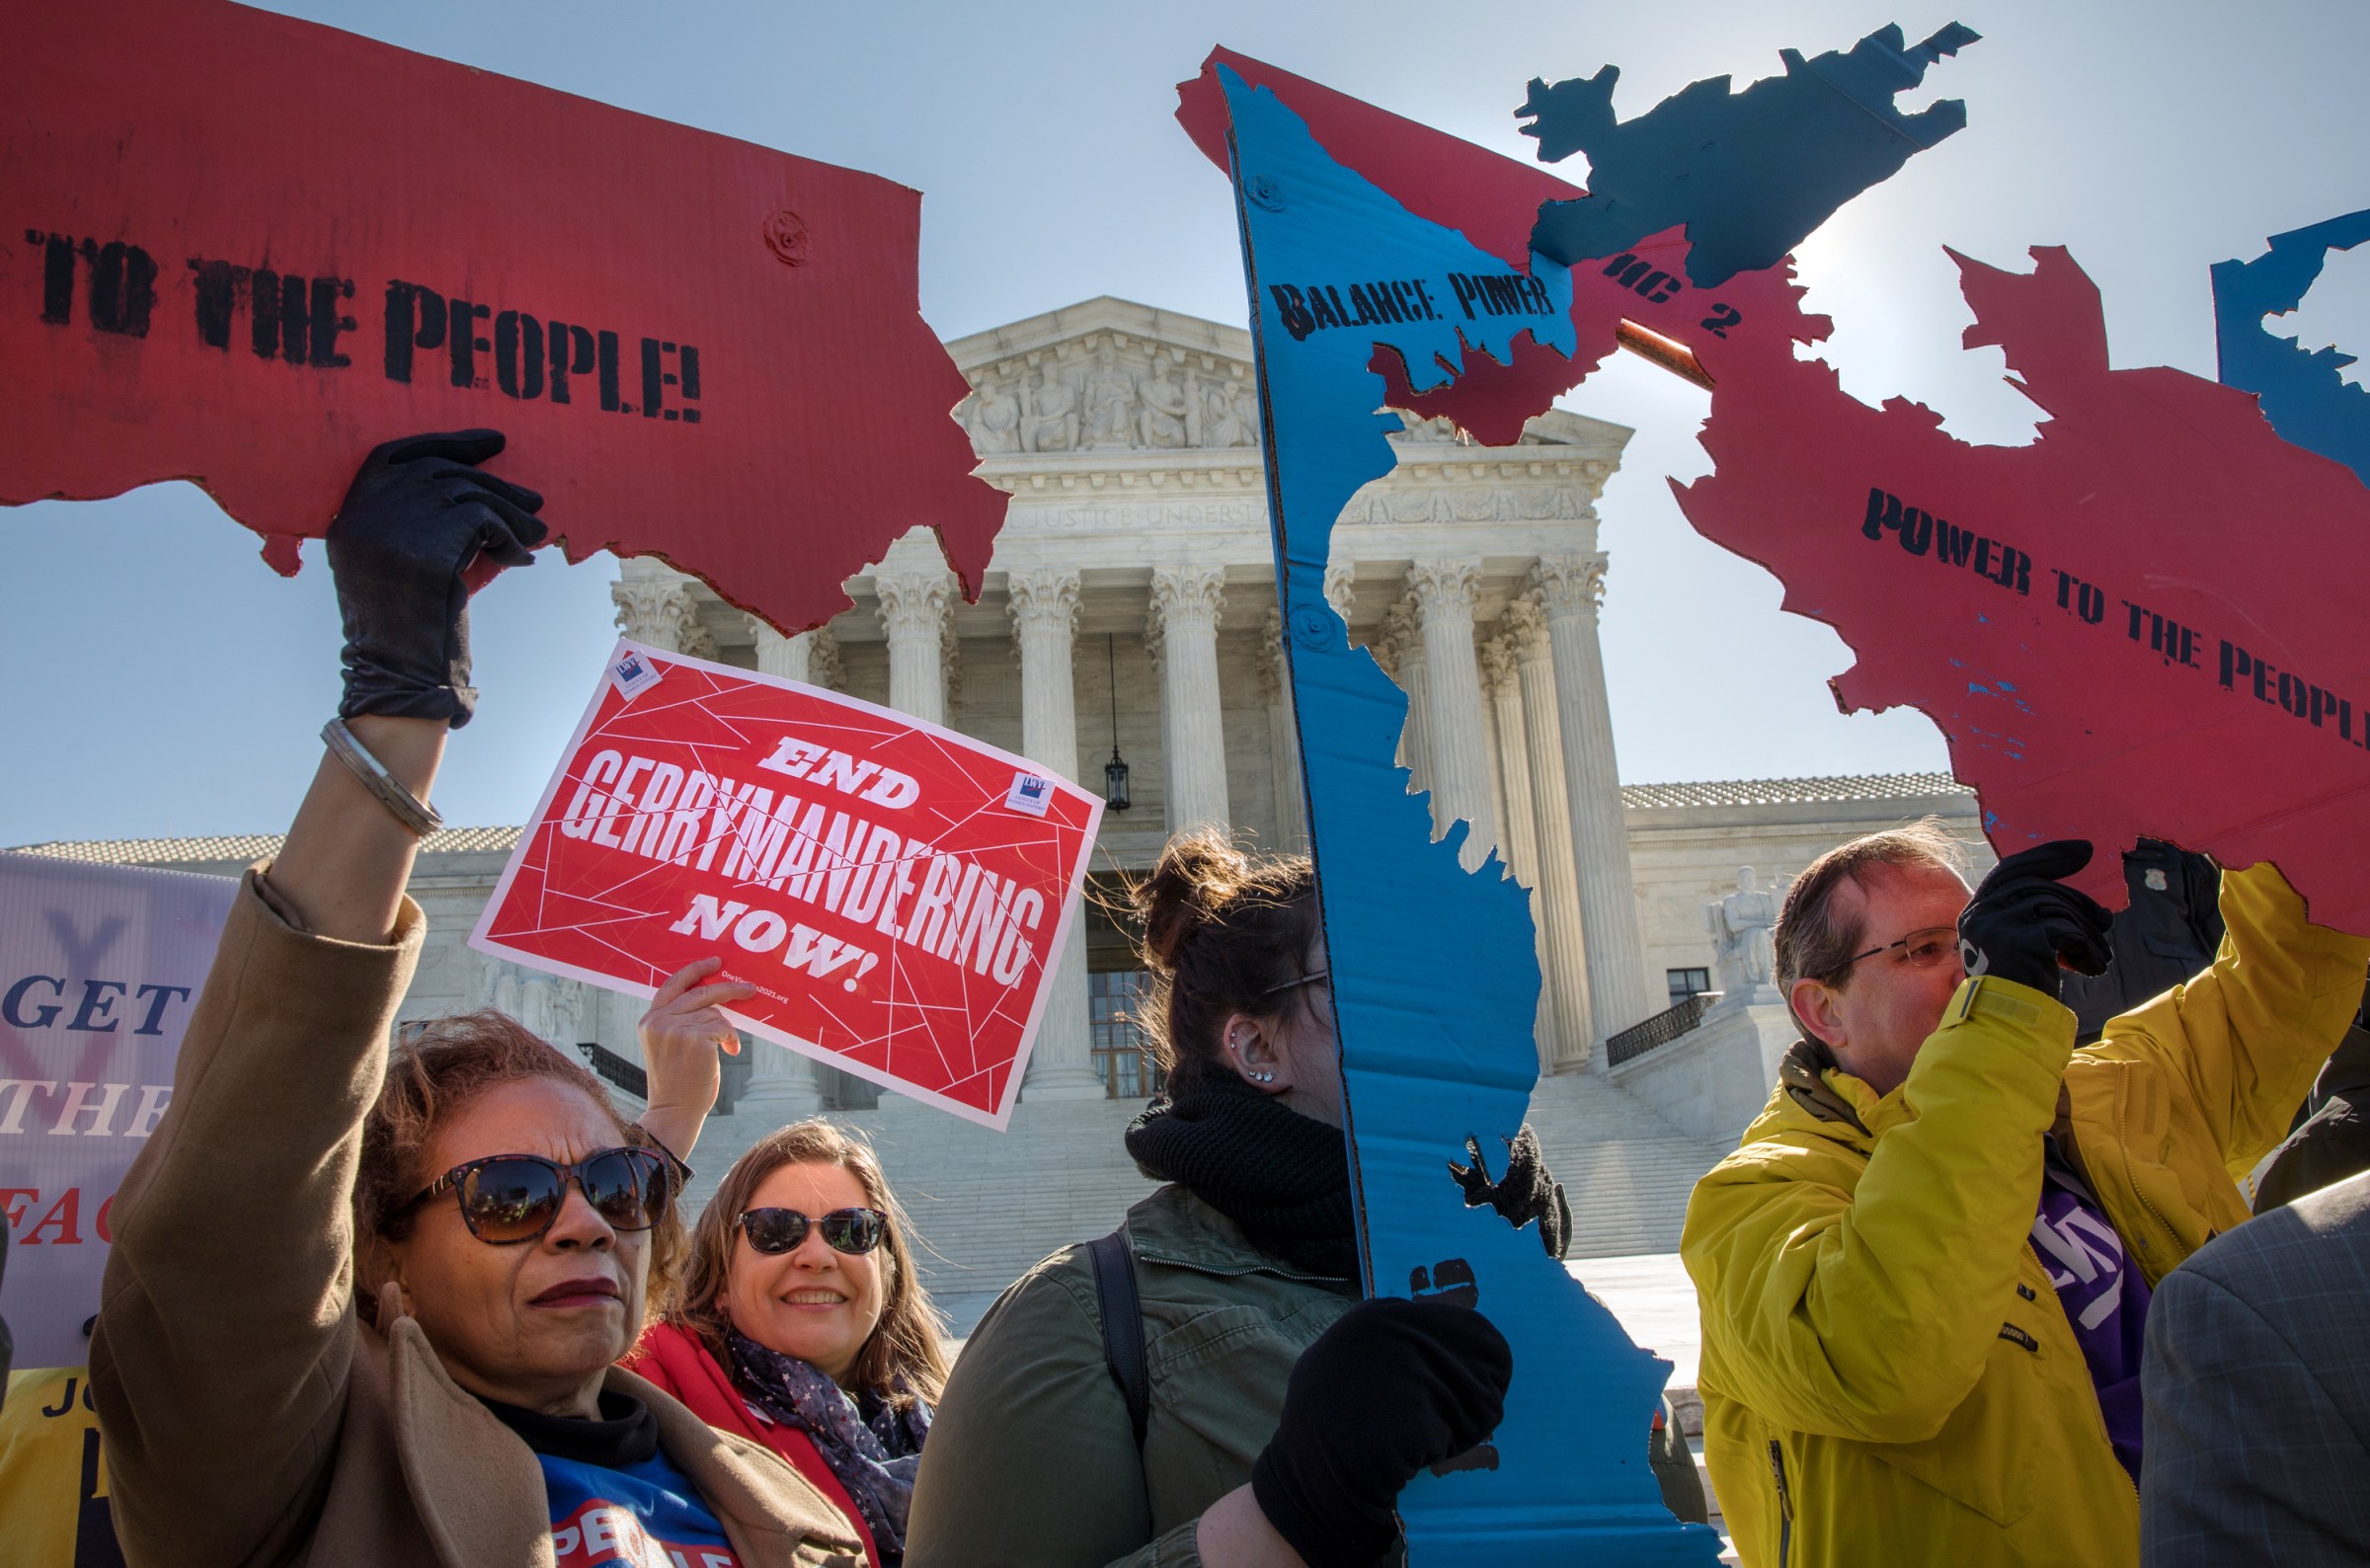 Anti-gerrymandering protesters outside of the Supreme Court’s building.